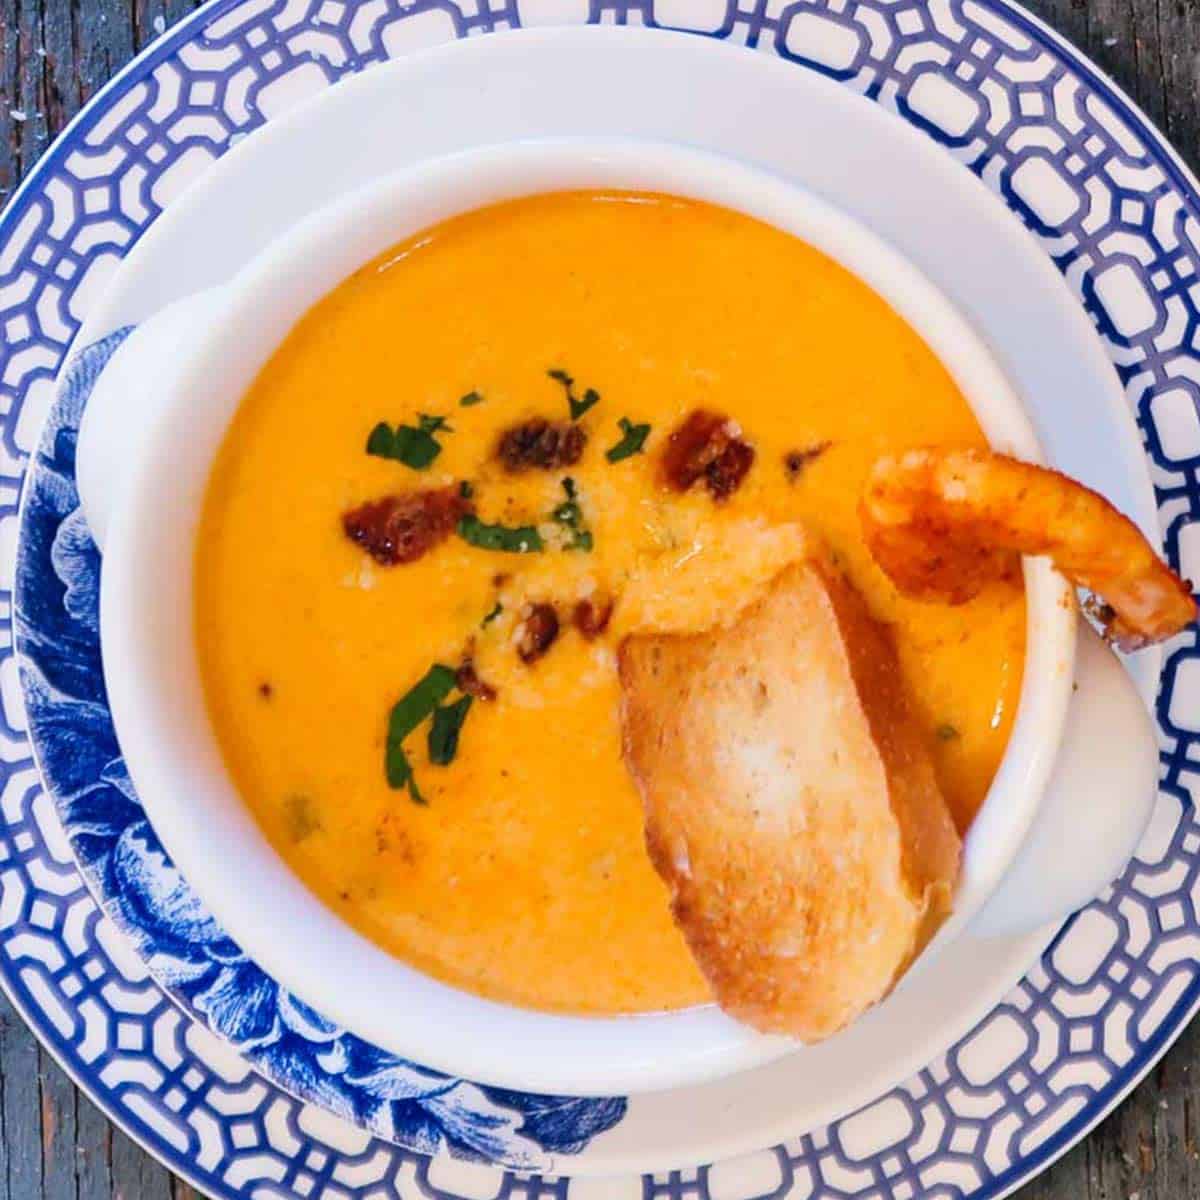 Shrimp bisque recipe in a white bowl on blue and white plates